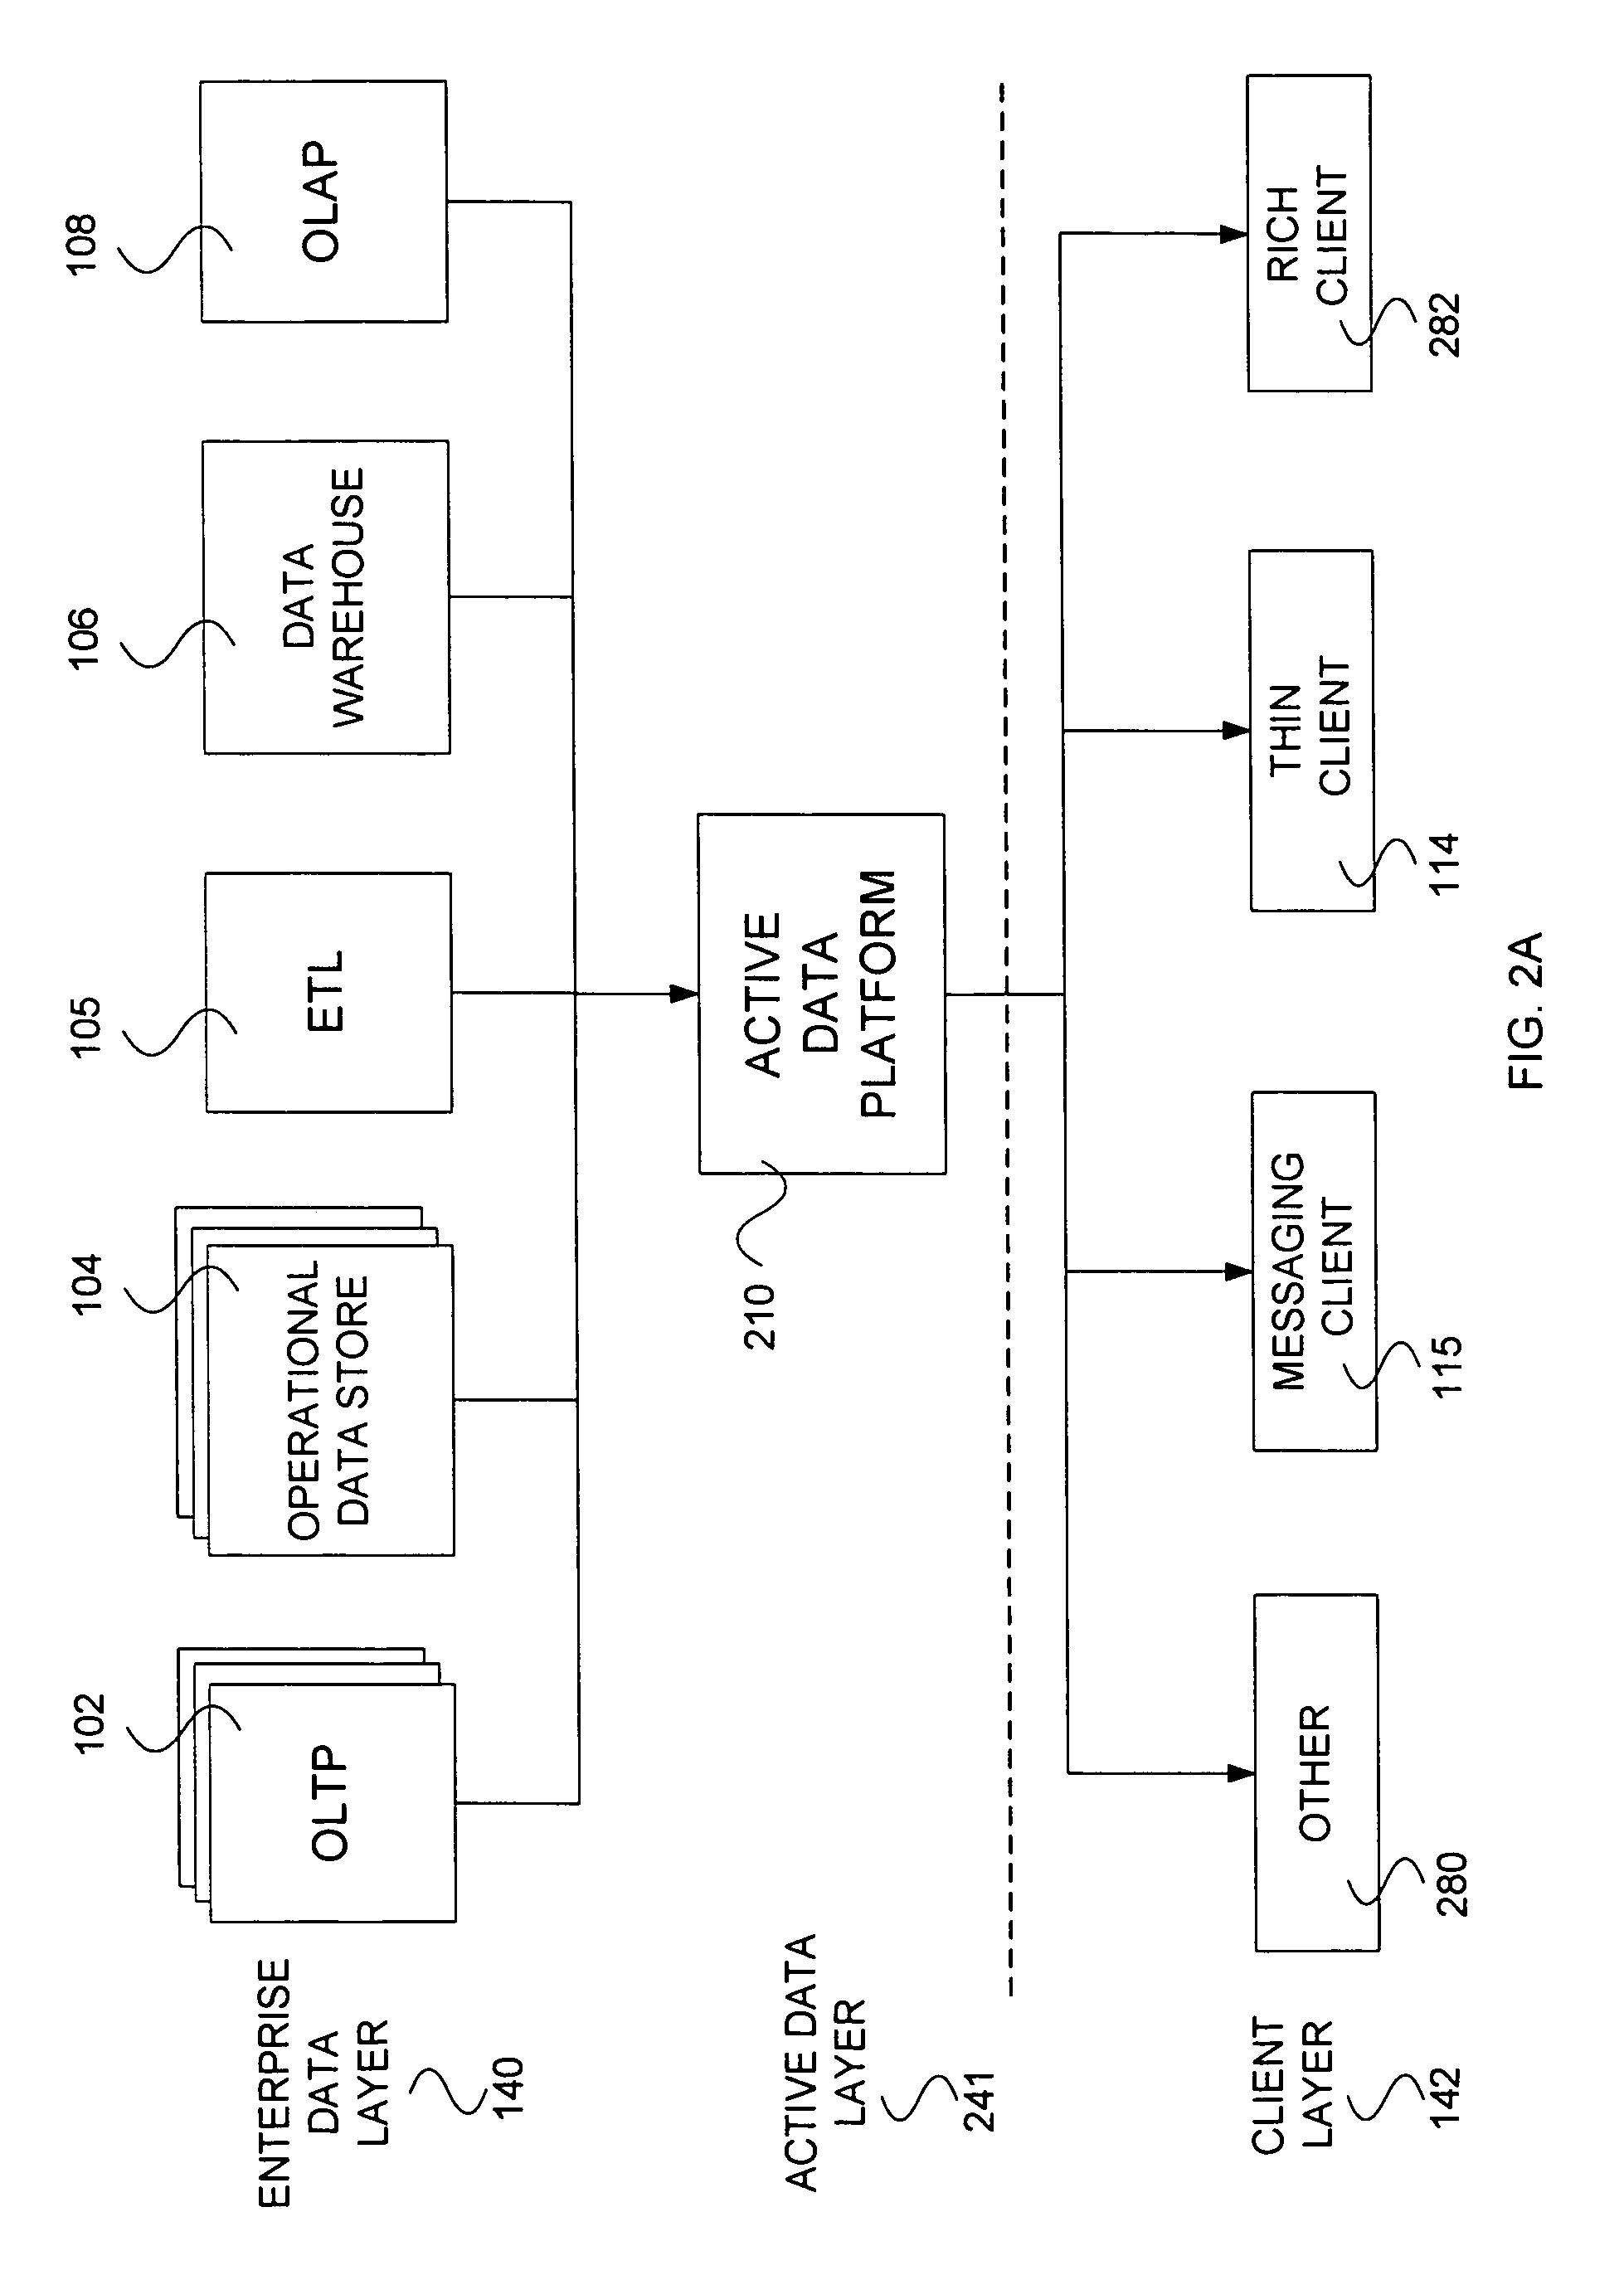 Architecture for general purpose near real-time business intelligence system and methods therefor